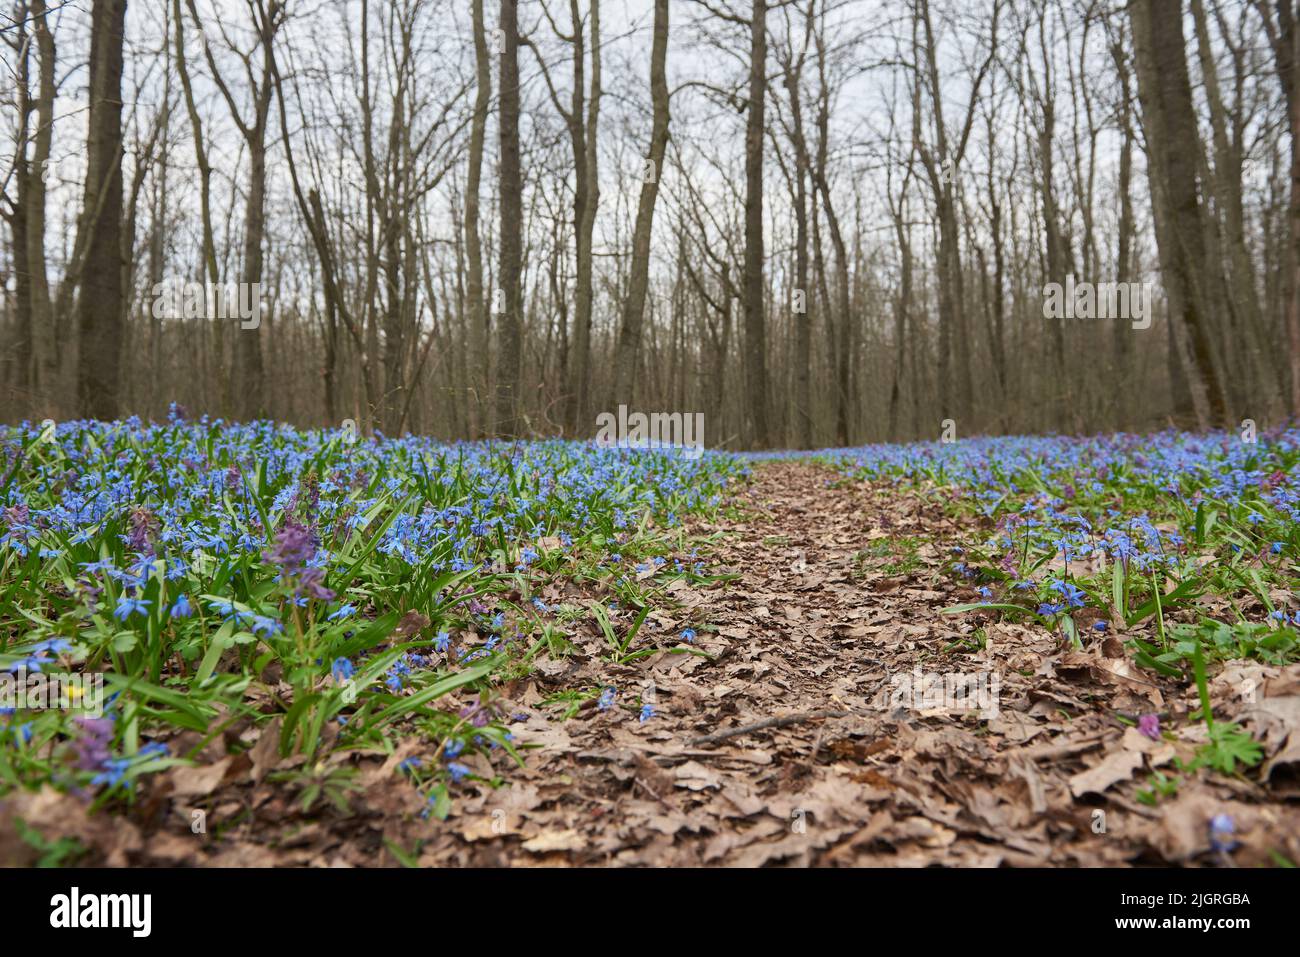 Spring forest with scilla flowers after winter in Russia. Stock Photo